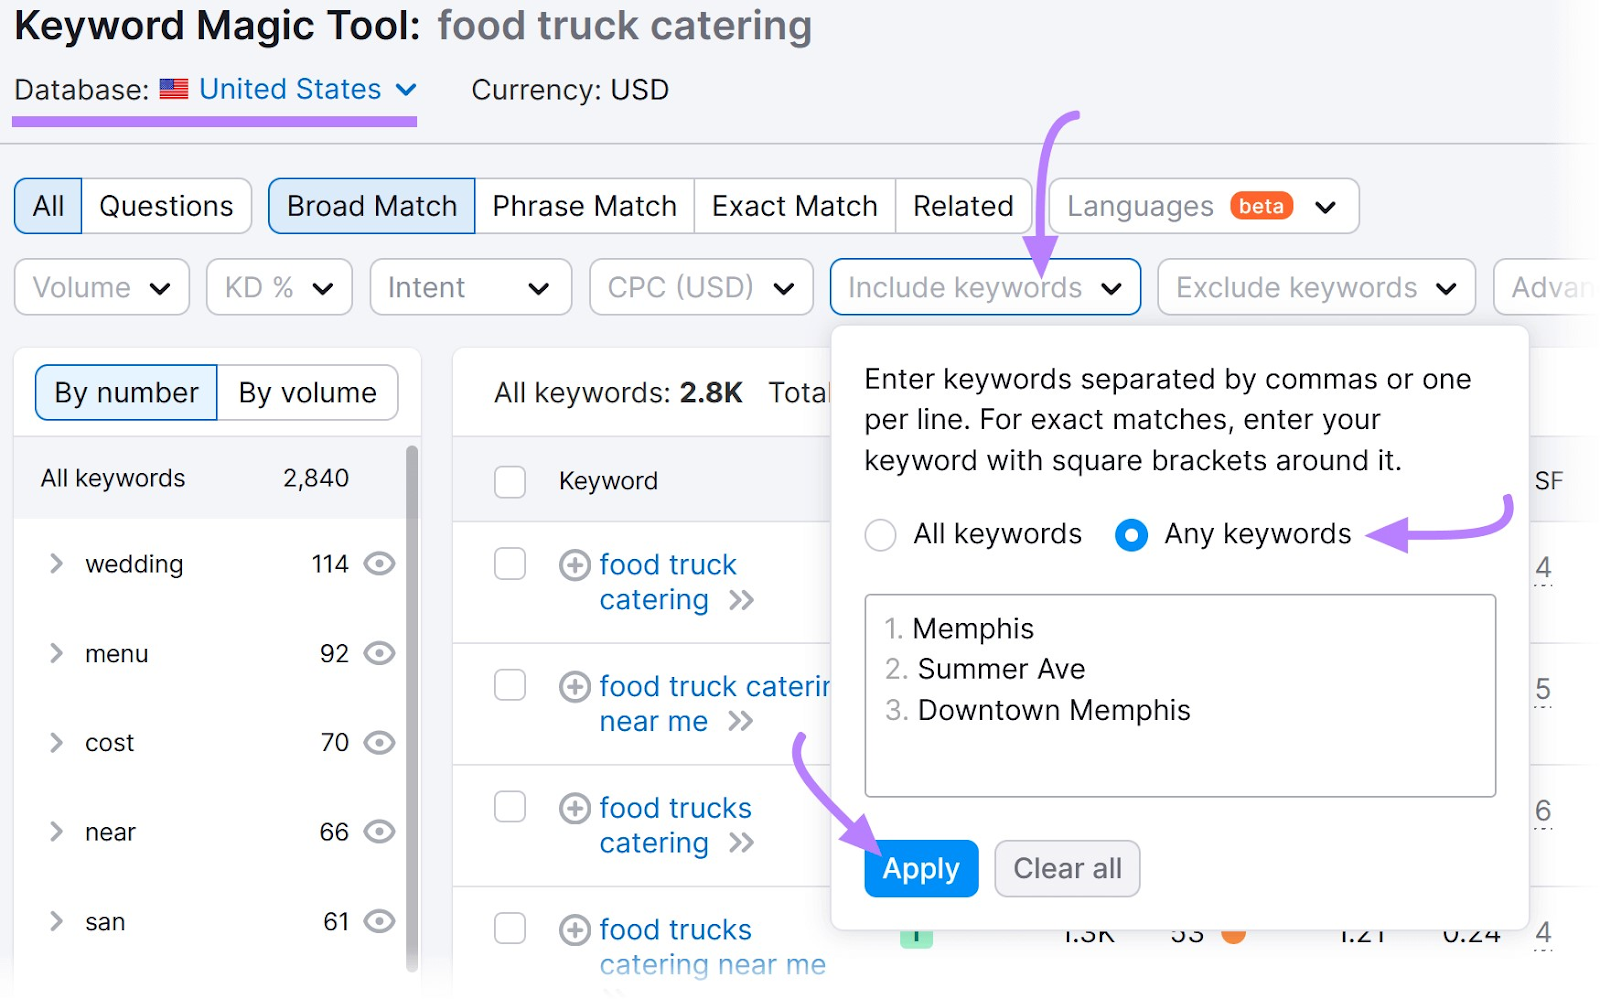 results for "food truck catering" search in the tool with "Include keywords" filter shown